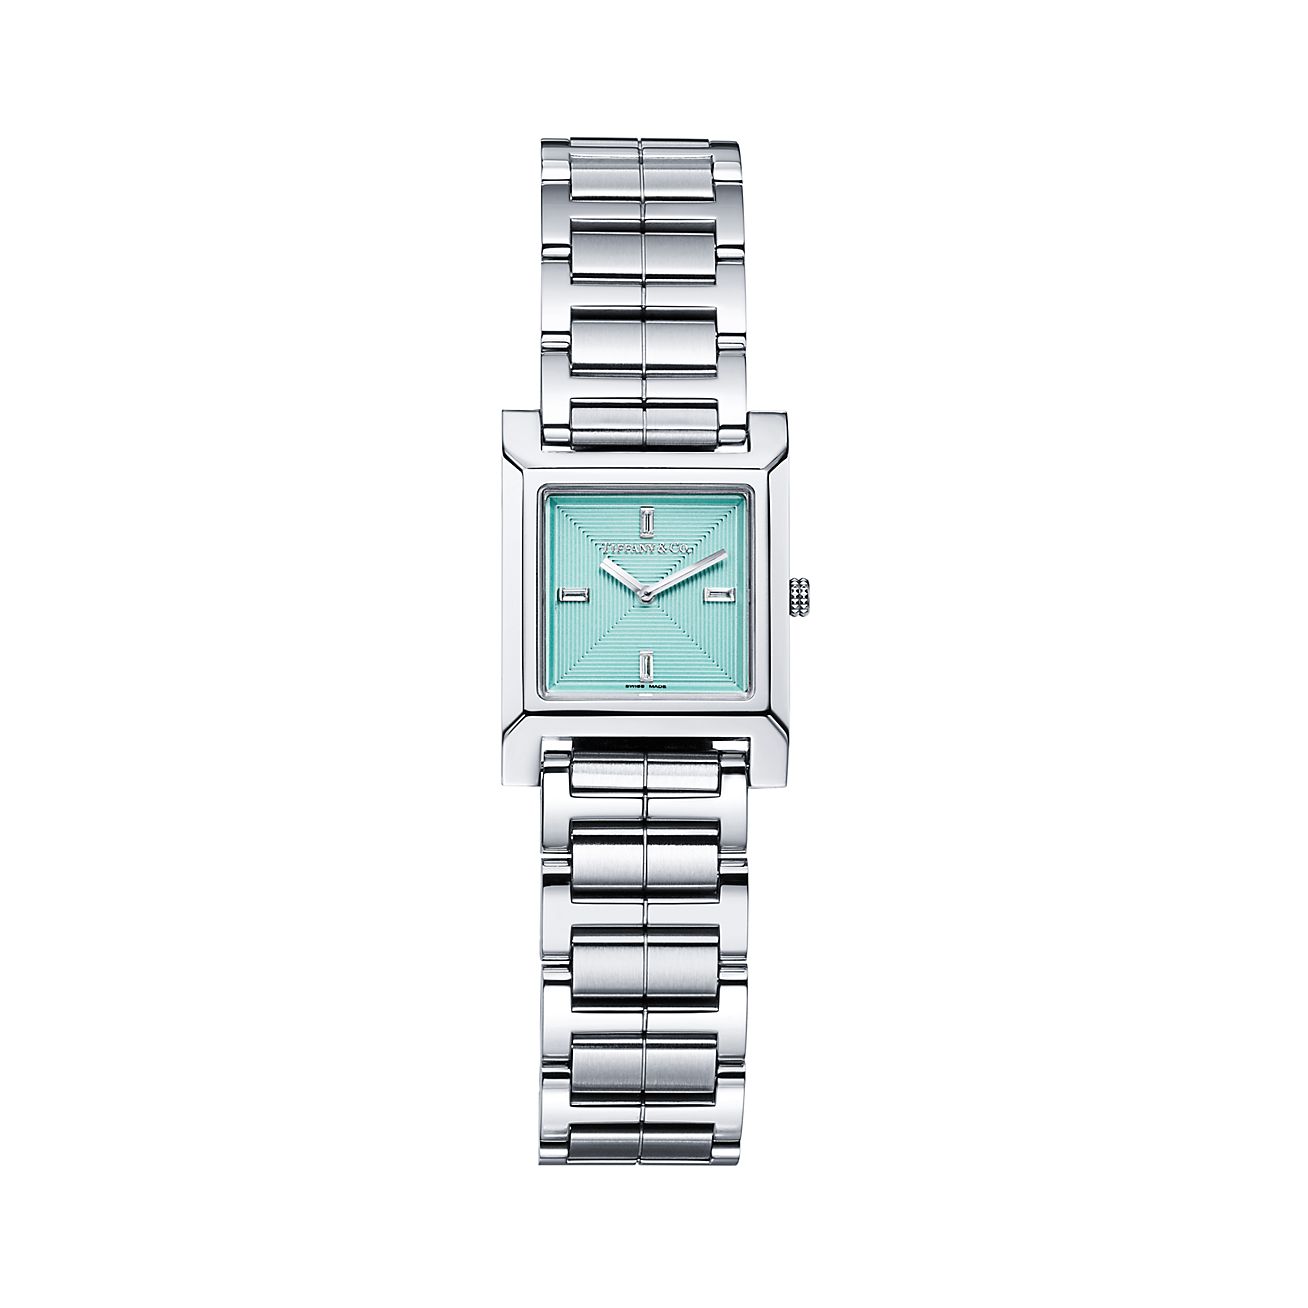 tiffany 1837 makers watch